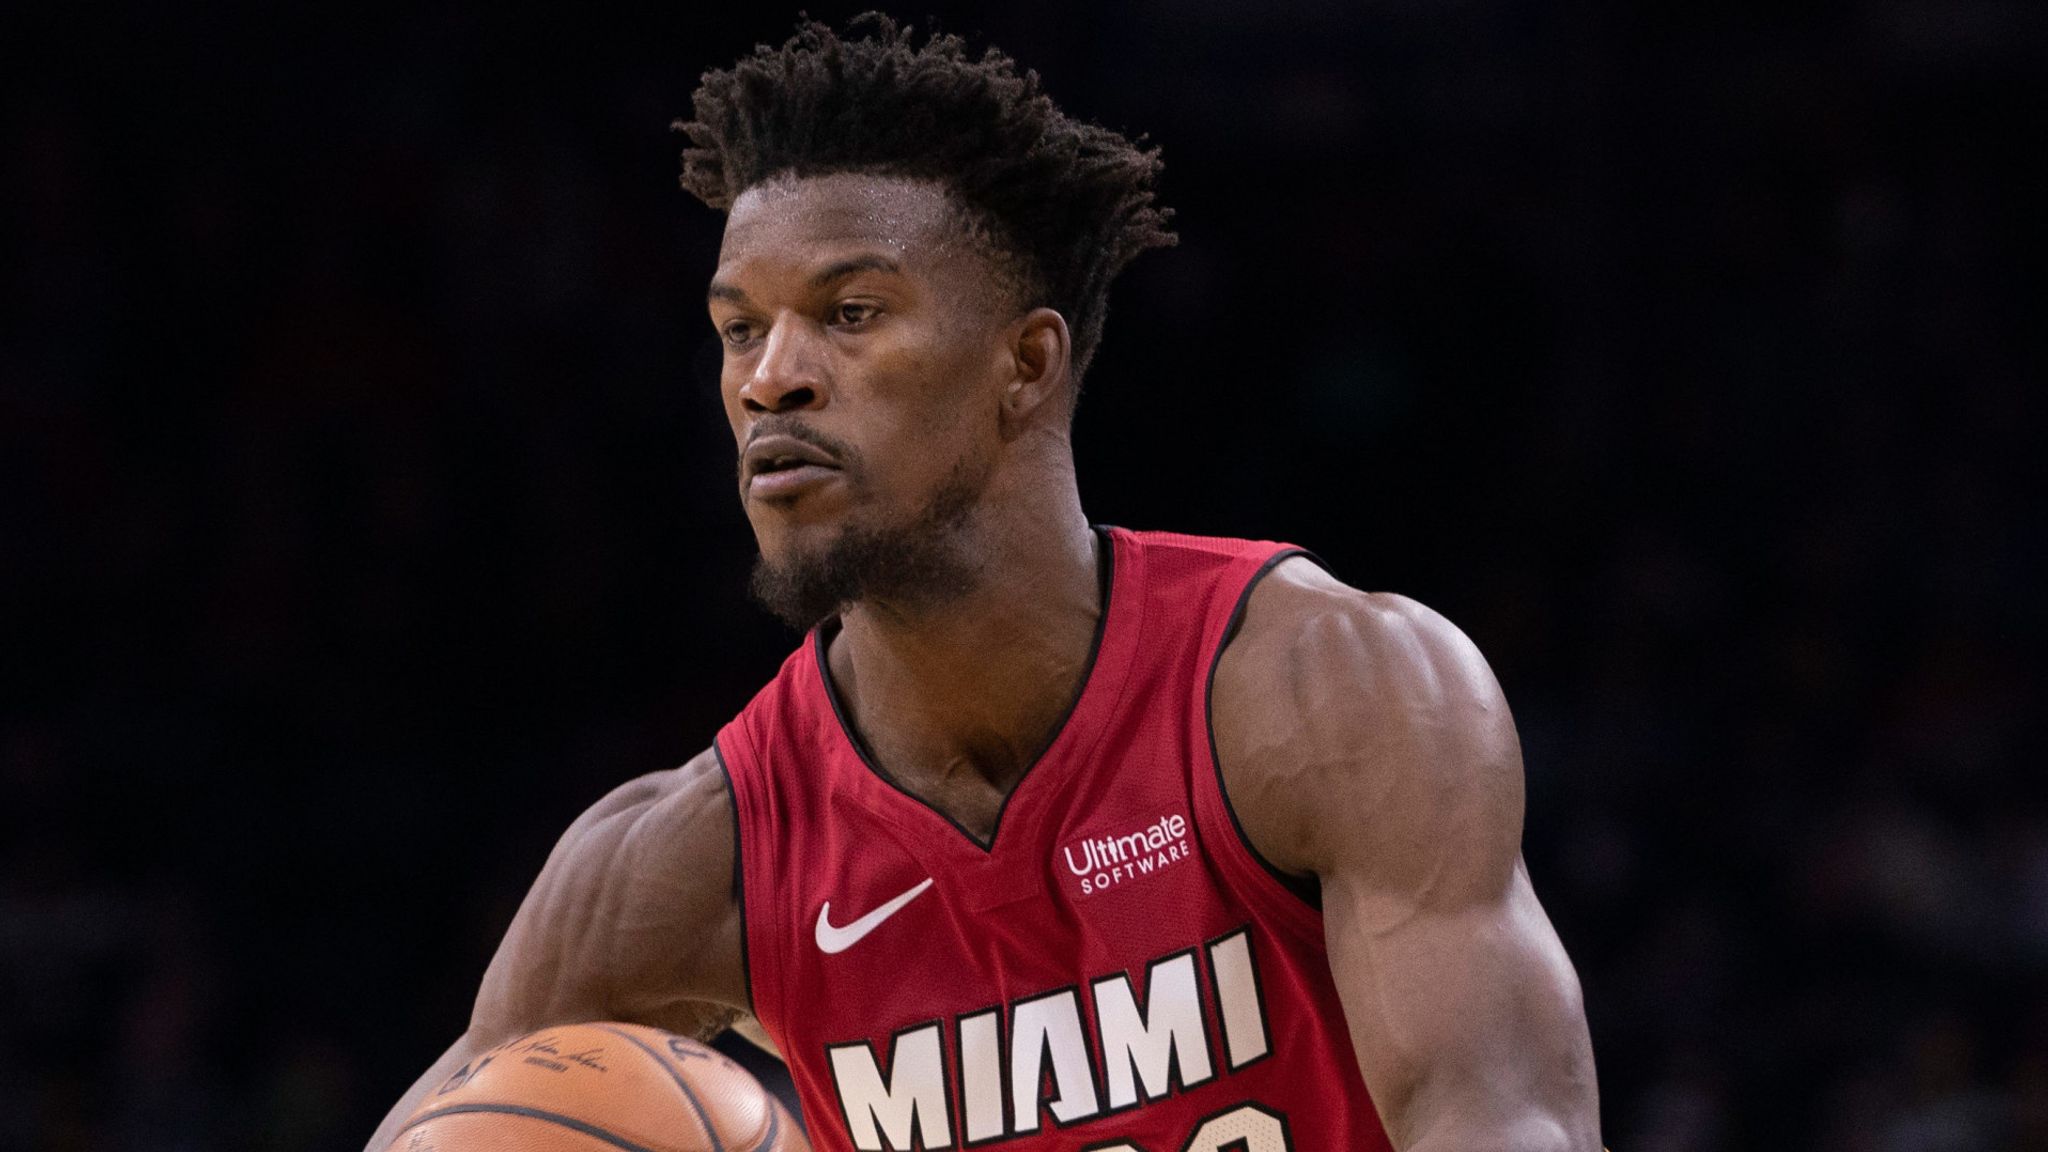 Jimmy Butler dishes a pass during the Miami Heat's win in Philadelphia...